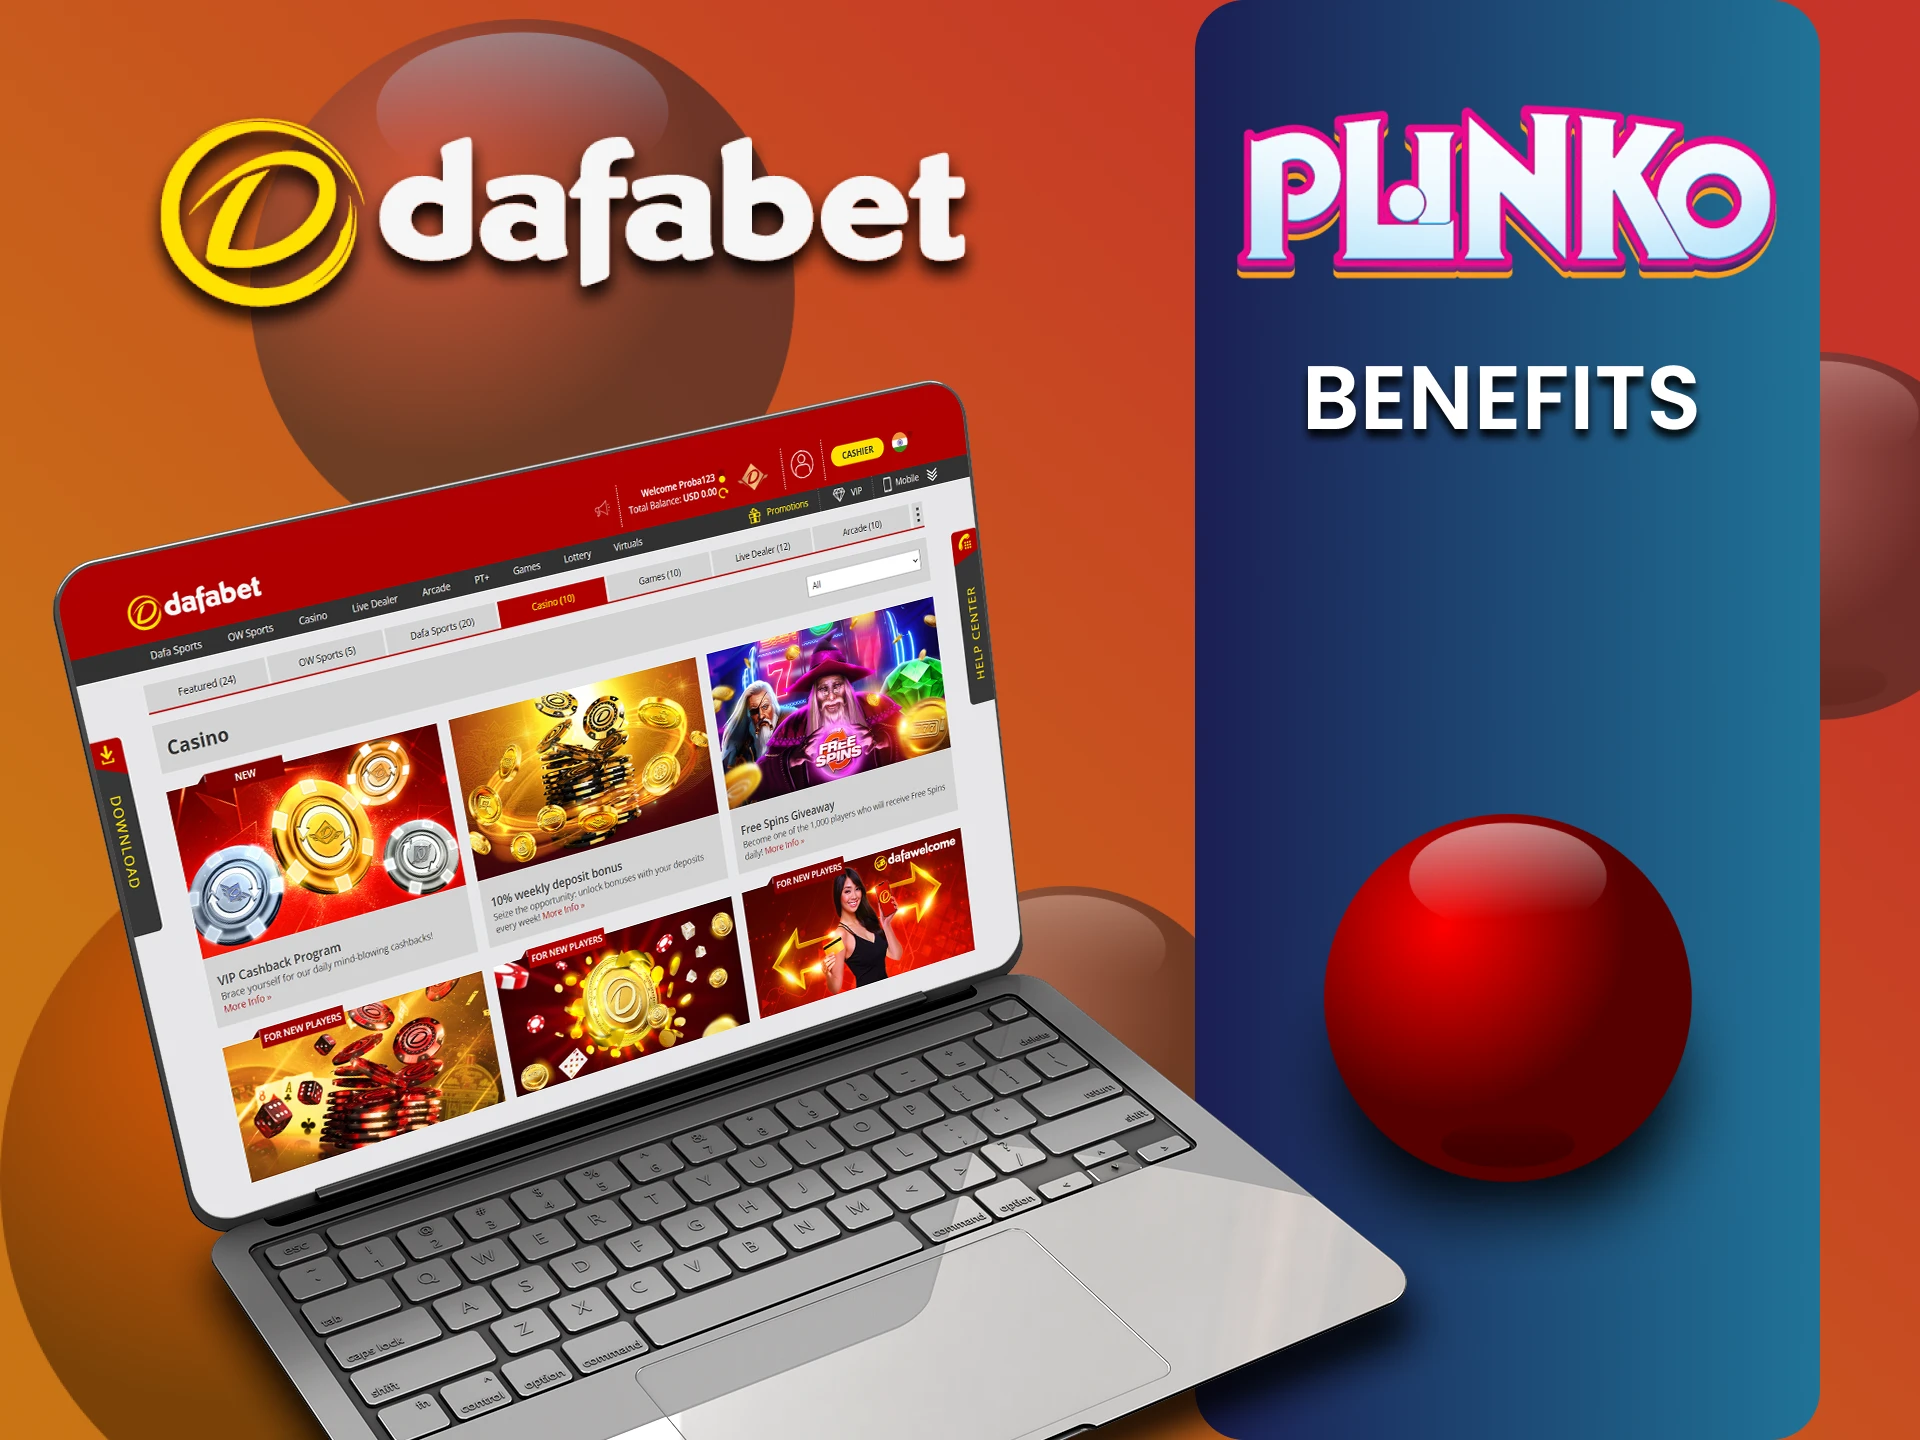 Dafabet has many advantages for playing Plinko.